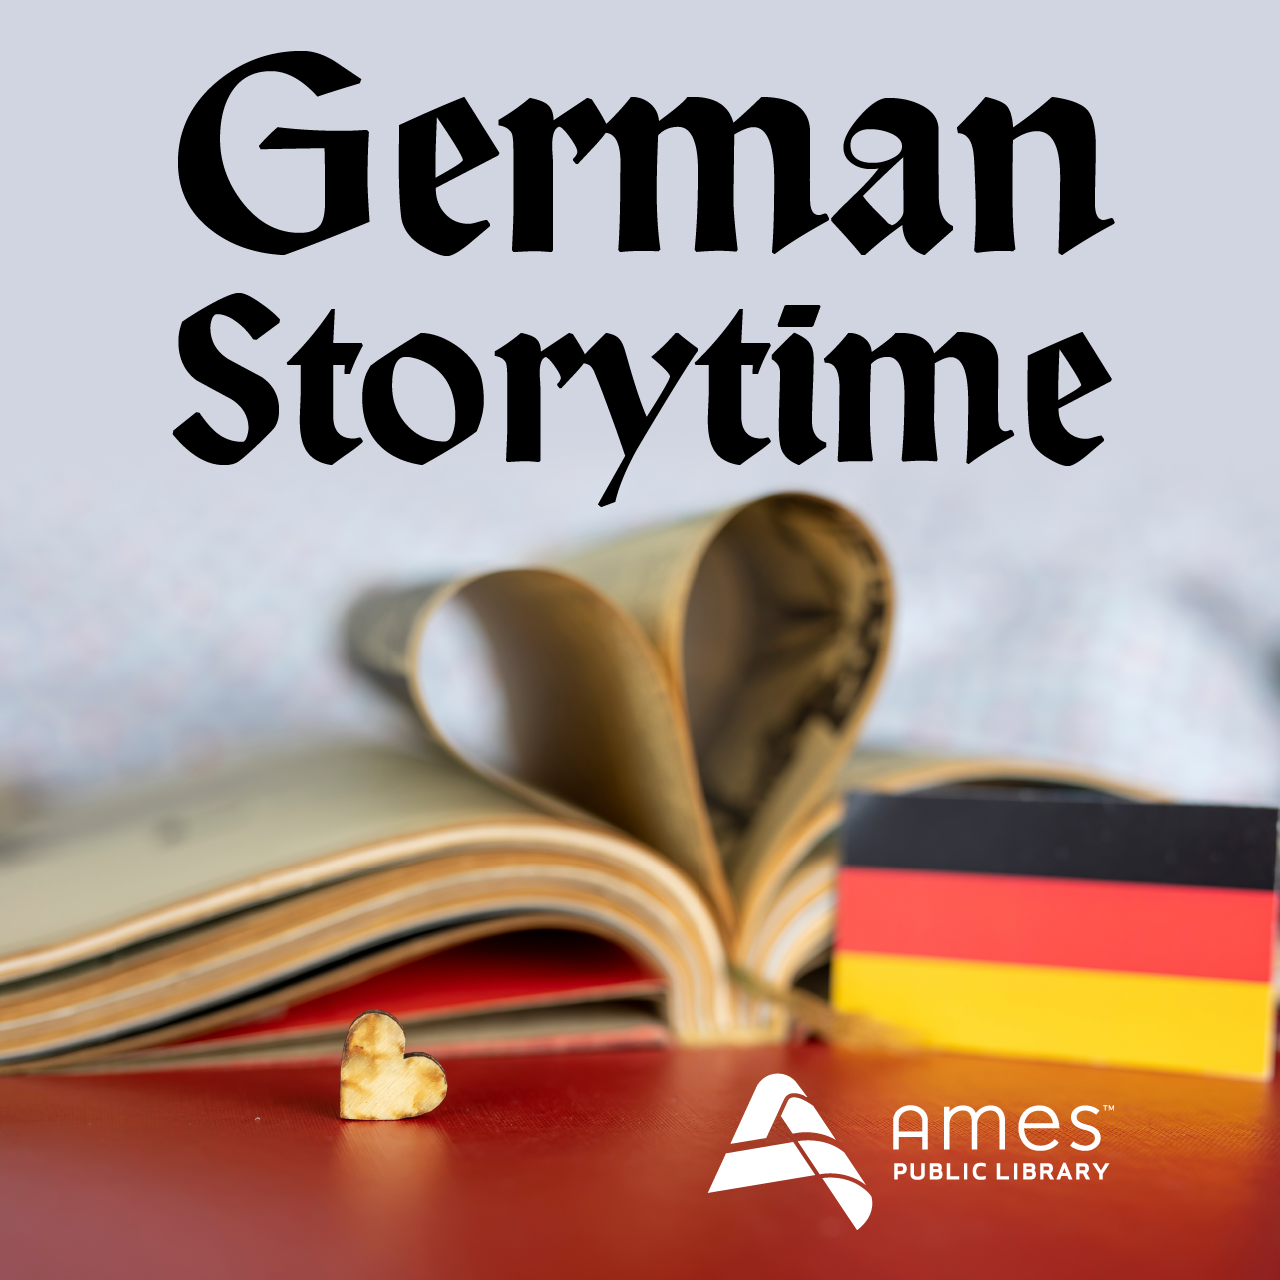 German Storytime. Image features small German flag, heart pin, and book with pages curved into a heart shape.